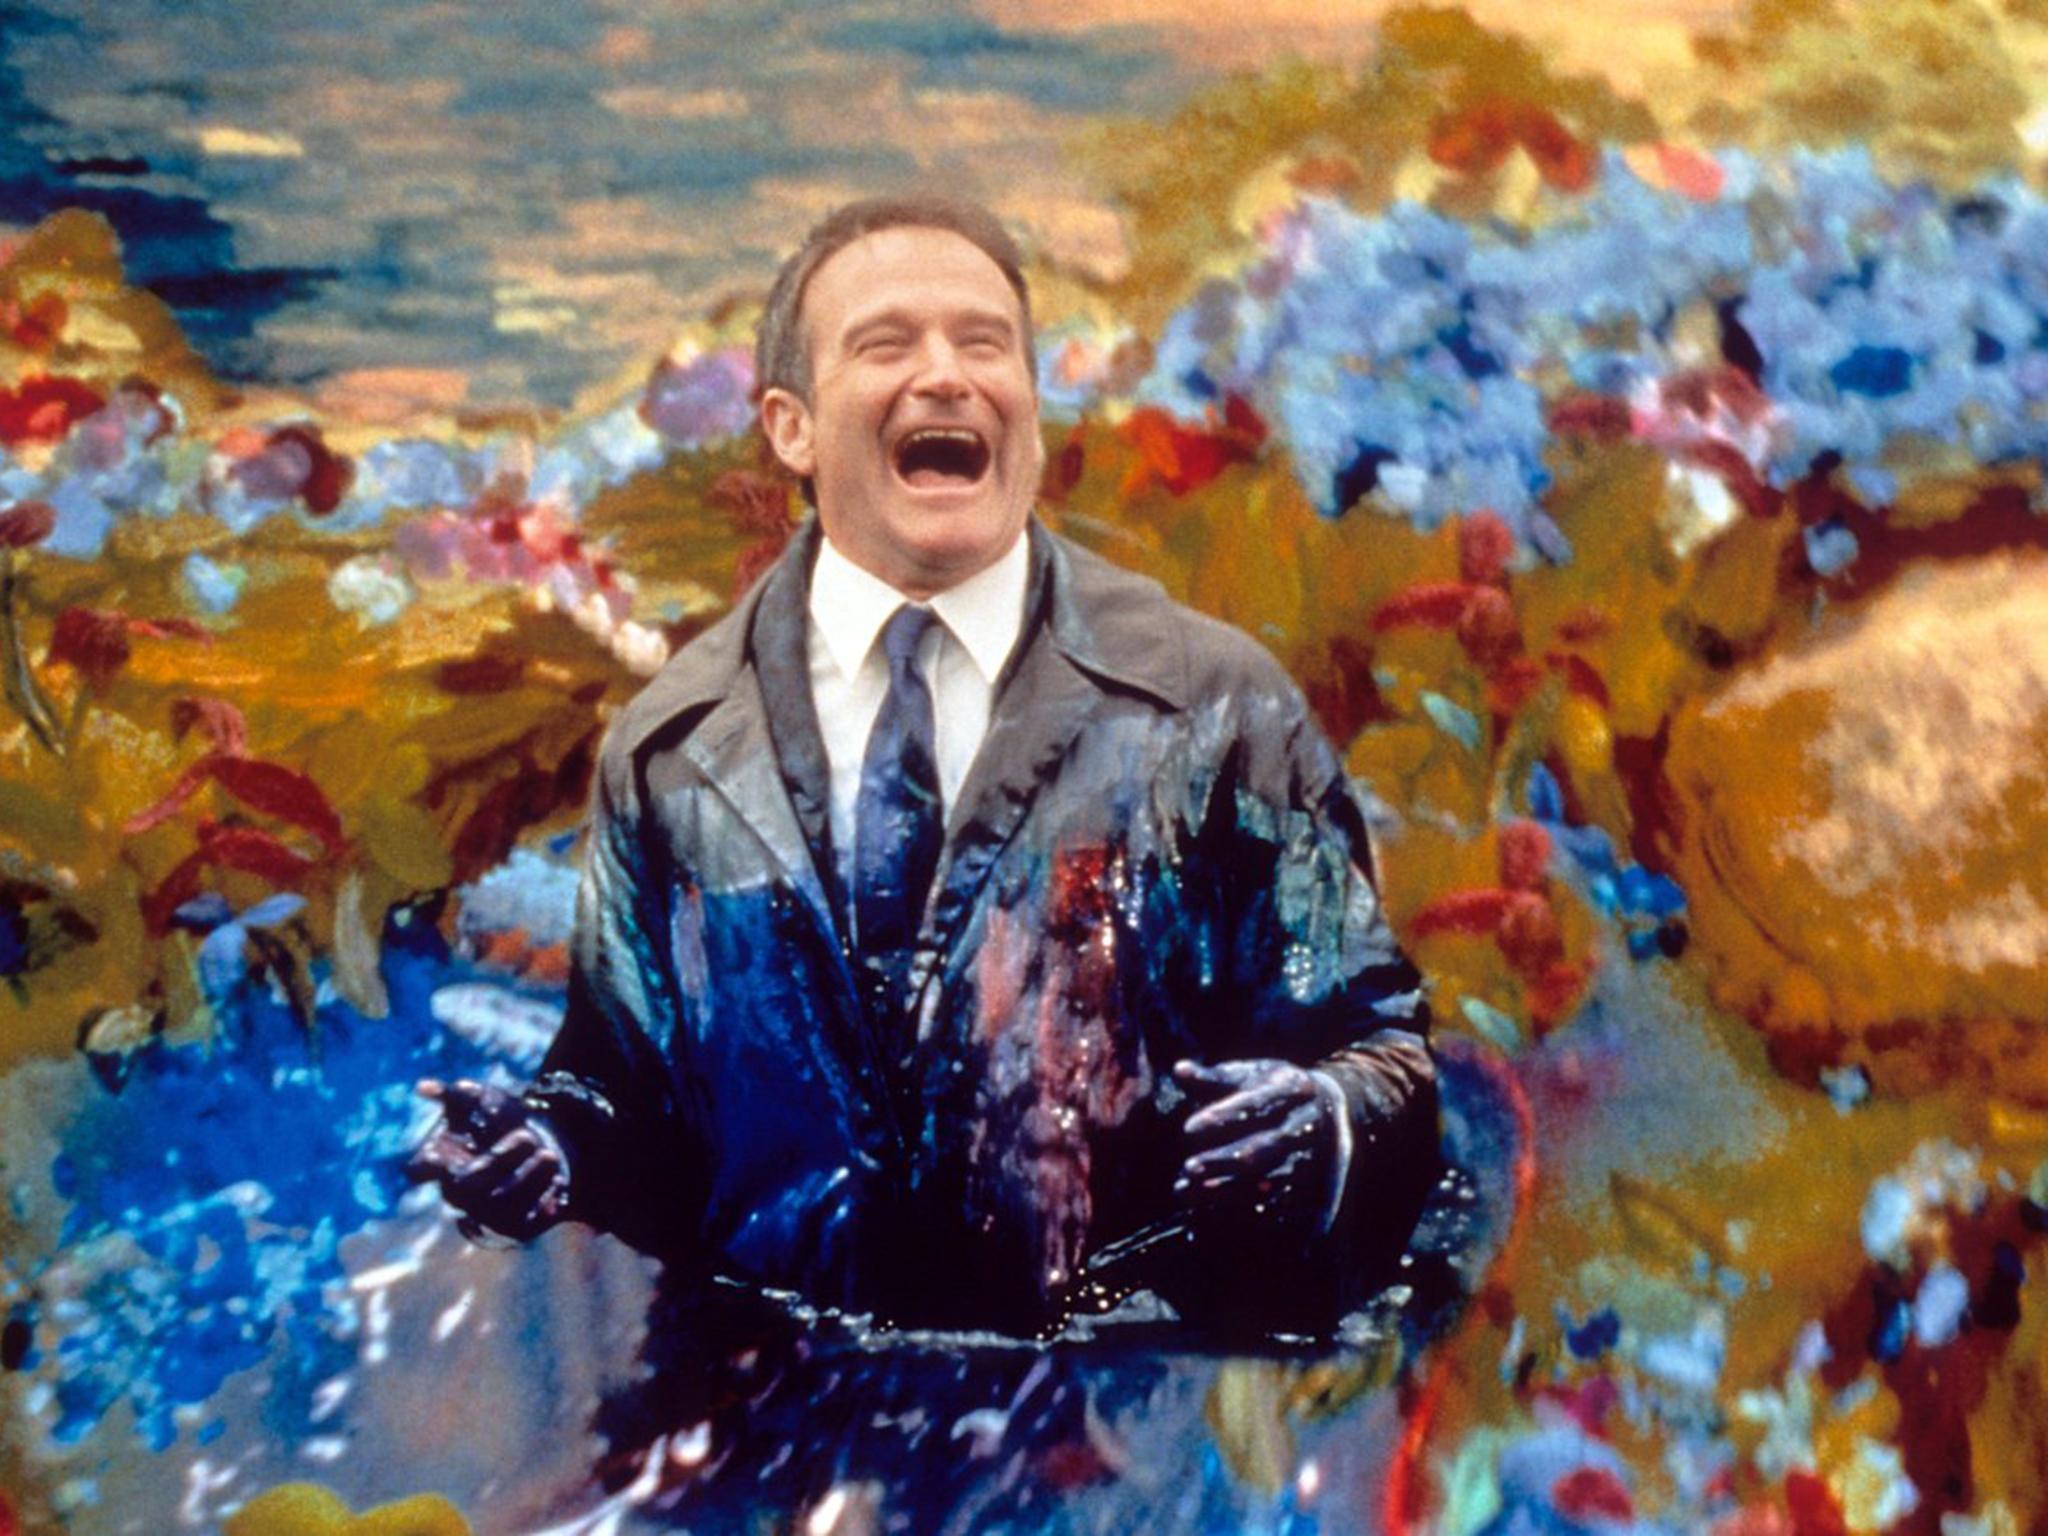 1998: Robin Williams in 'What Dreams May Come'